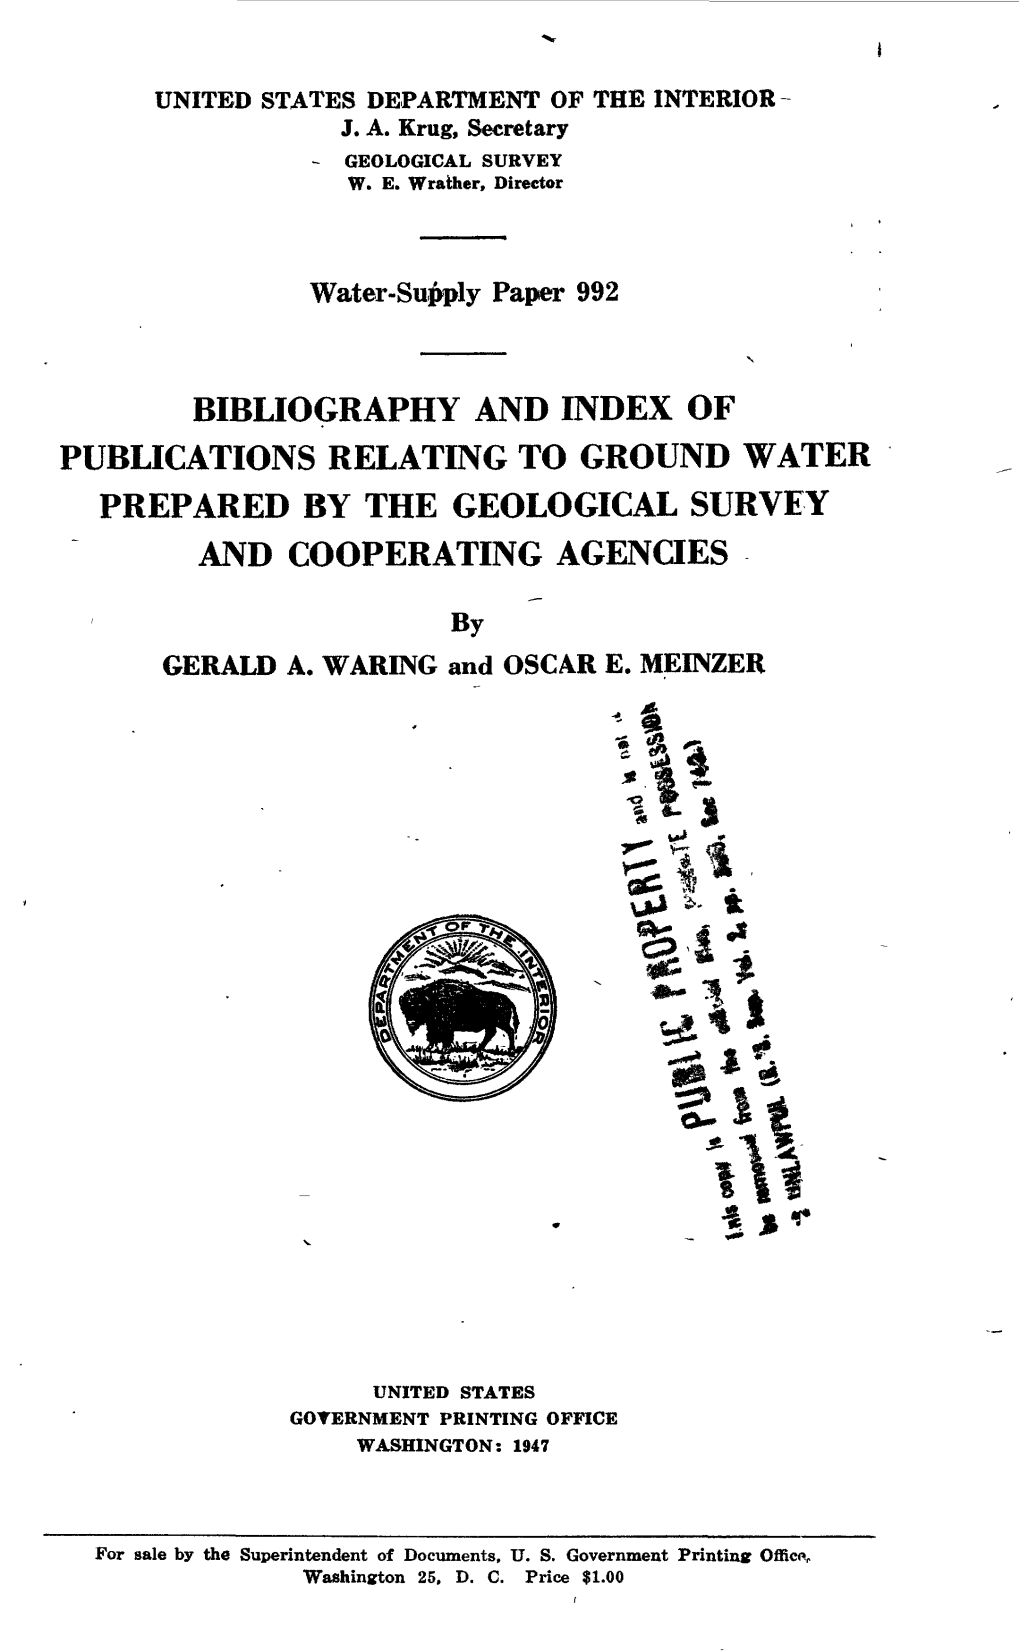 BIBLIOGRAPHY and INDEX of PUBLICATIONS RELATING to GROUND WATER PREPARED by the GEOLOGICAL SURVEY and COOPERATING AGENCIES *- Ft